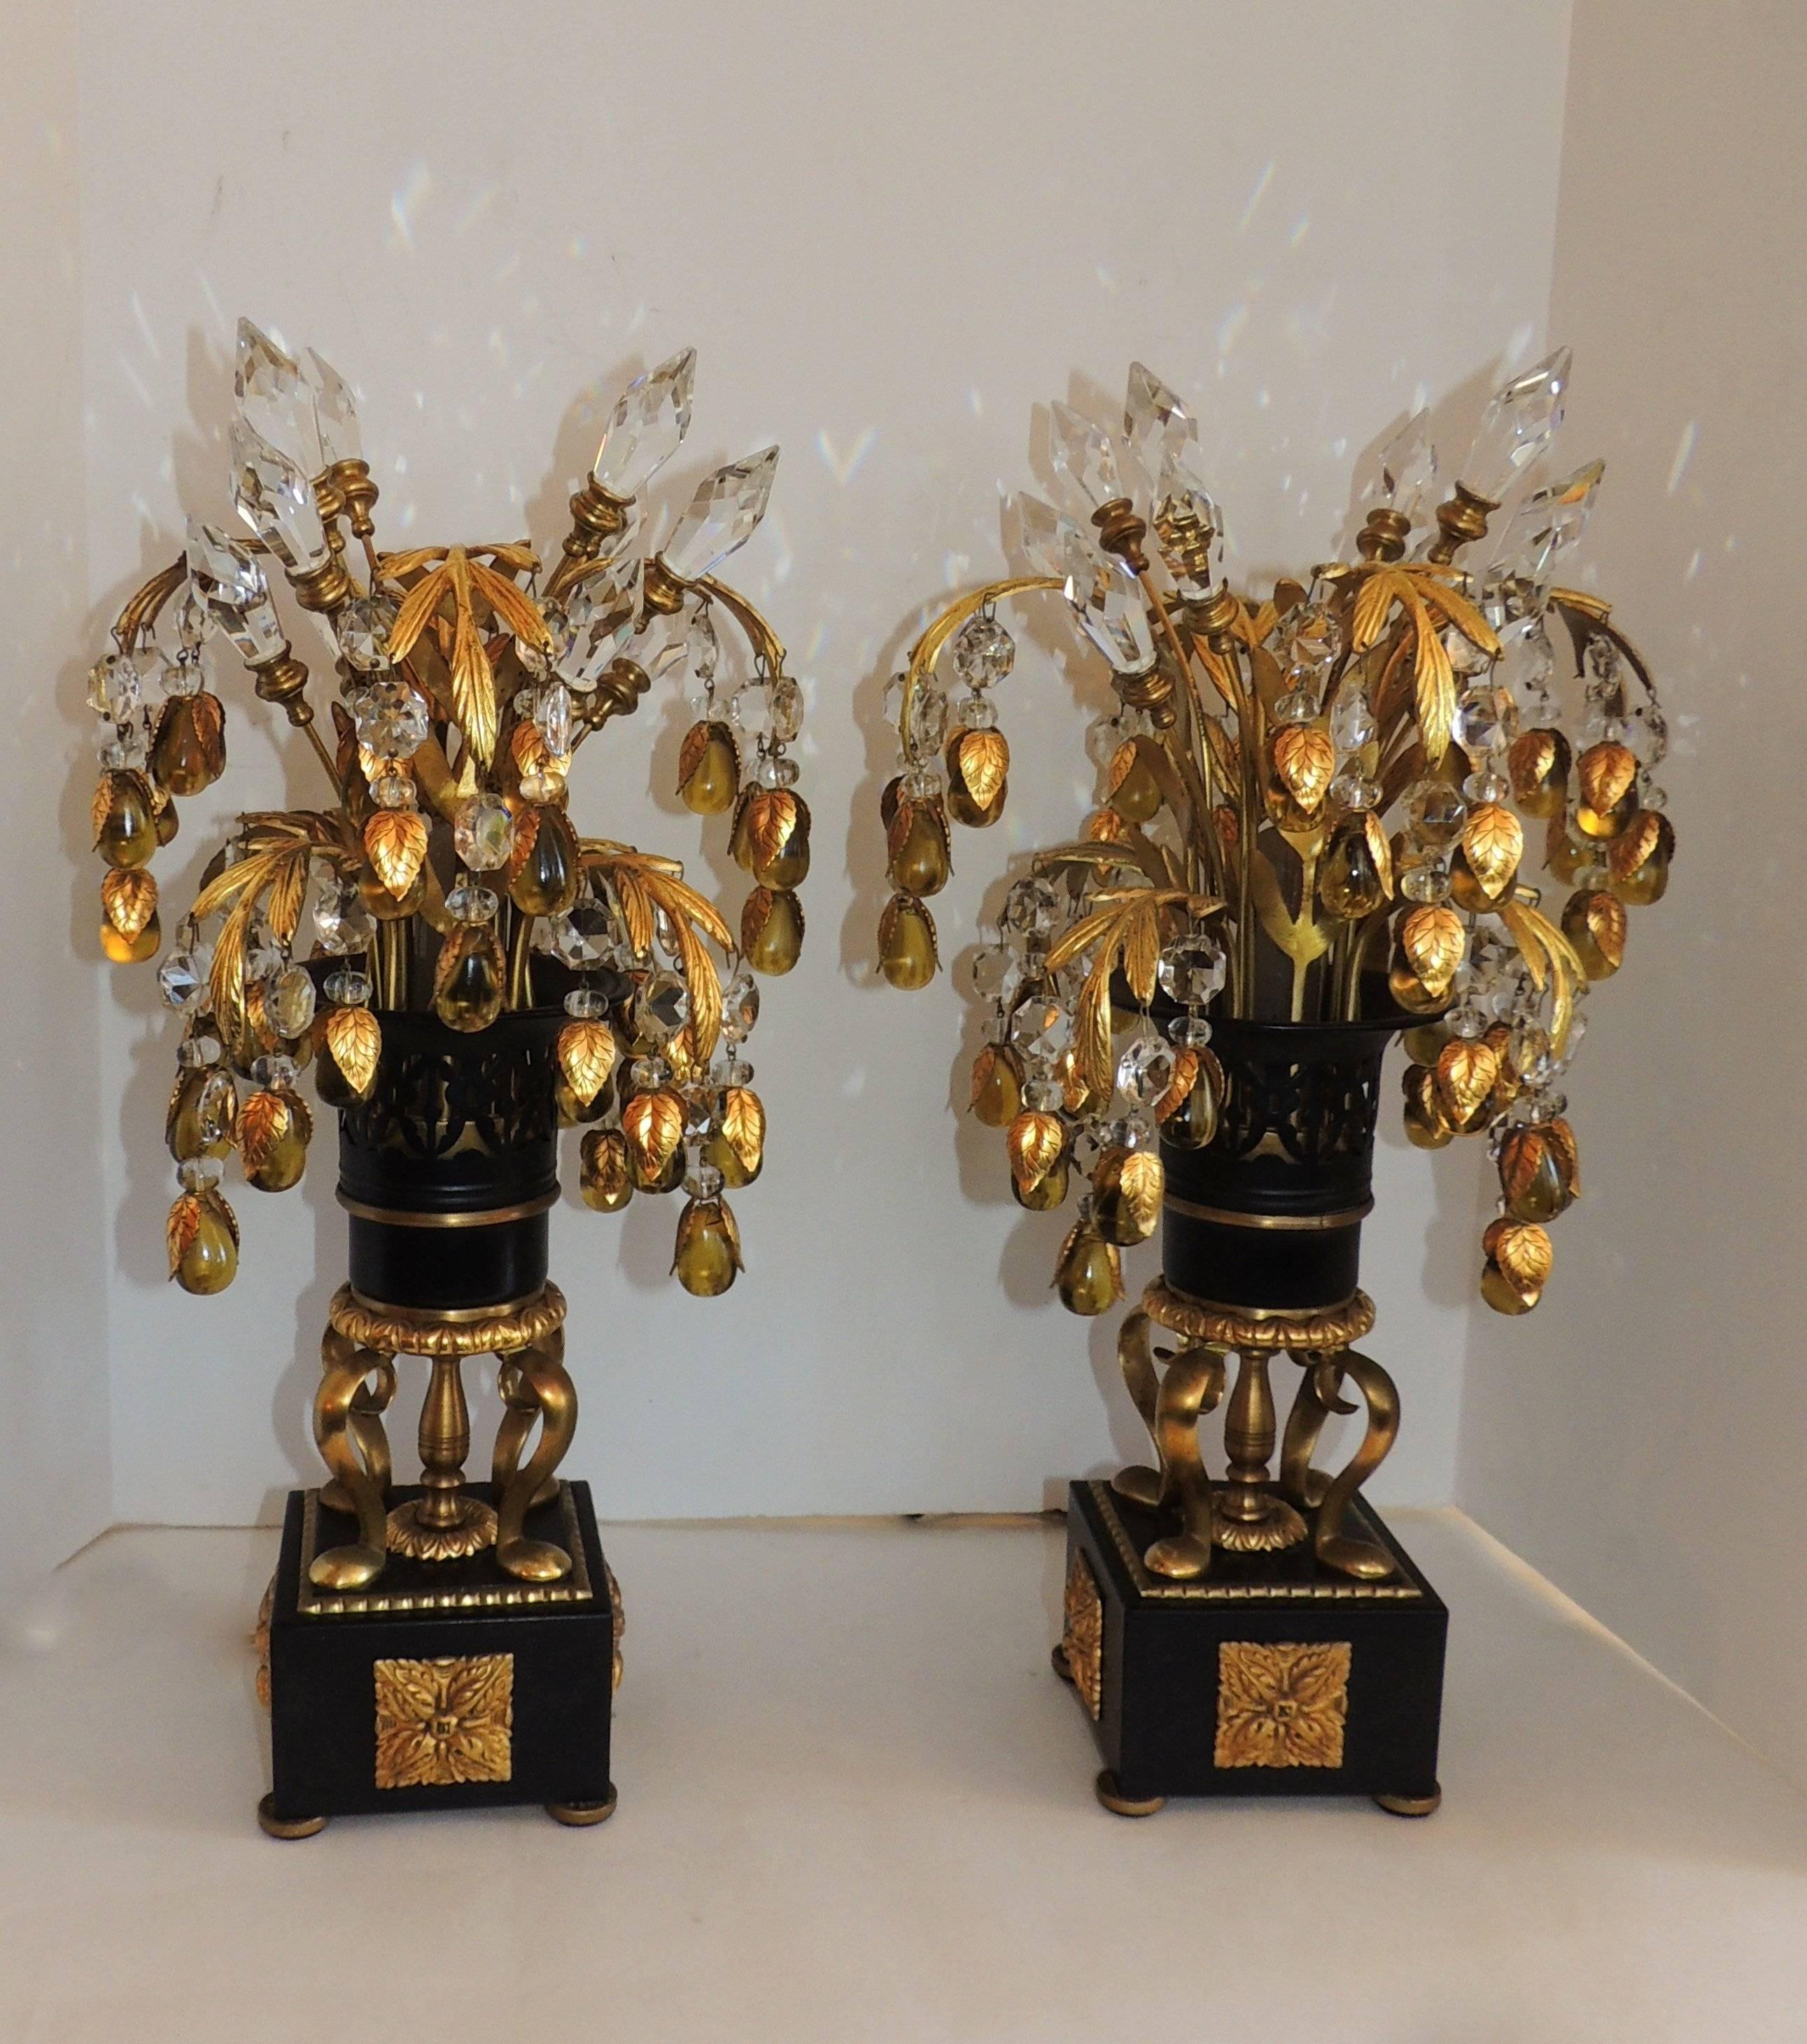 Elegant pair of doré bronze and crystal drop tole lamps
doré bronze leaves and mountings on the tole base are a wonderful backdrop for the flowing leaves that are finished with crystal prisms and amber crystal with bronze leaf overlays. Crystal